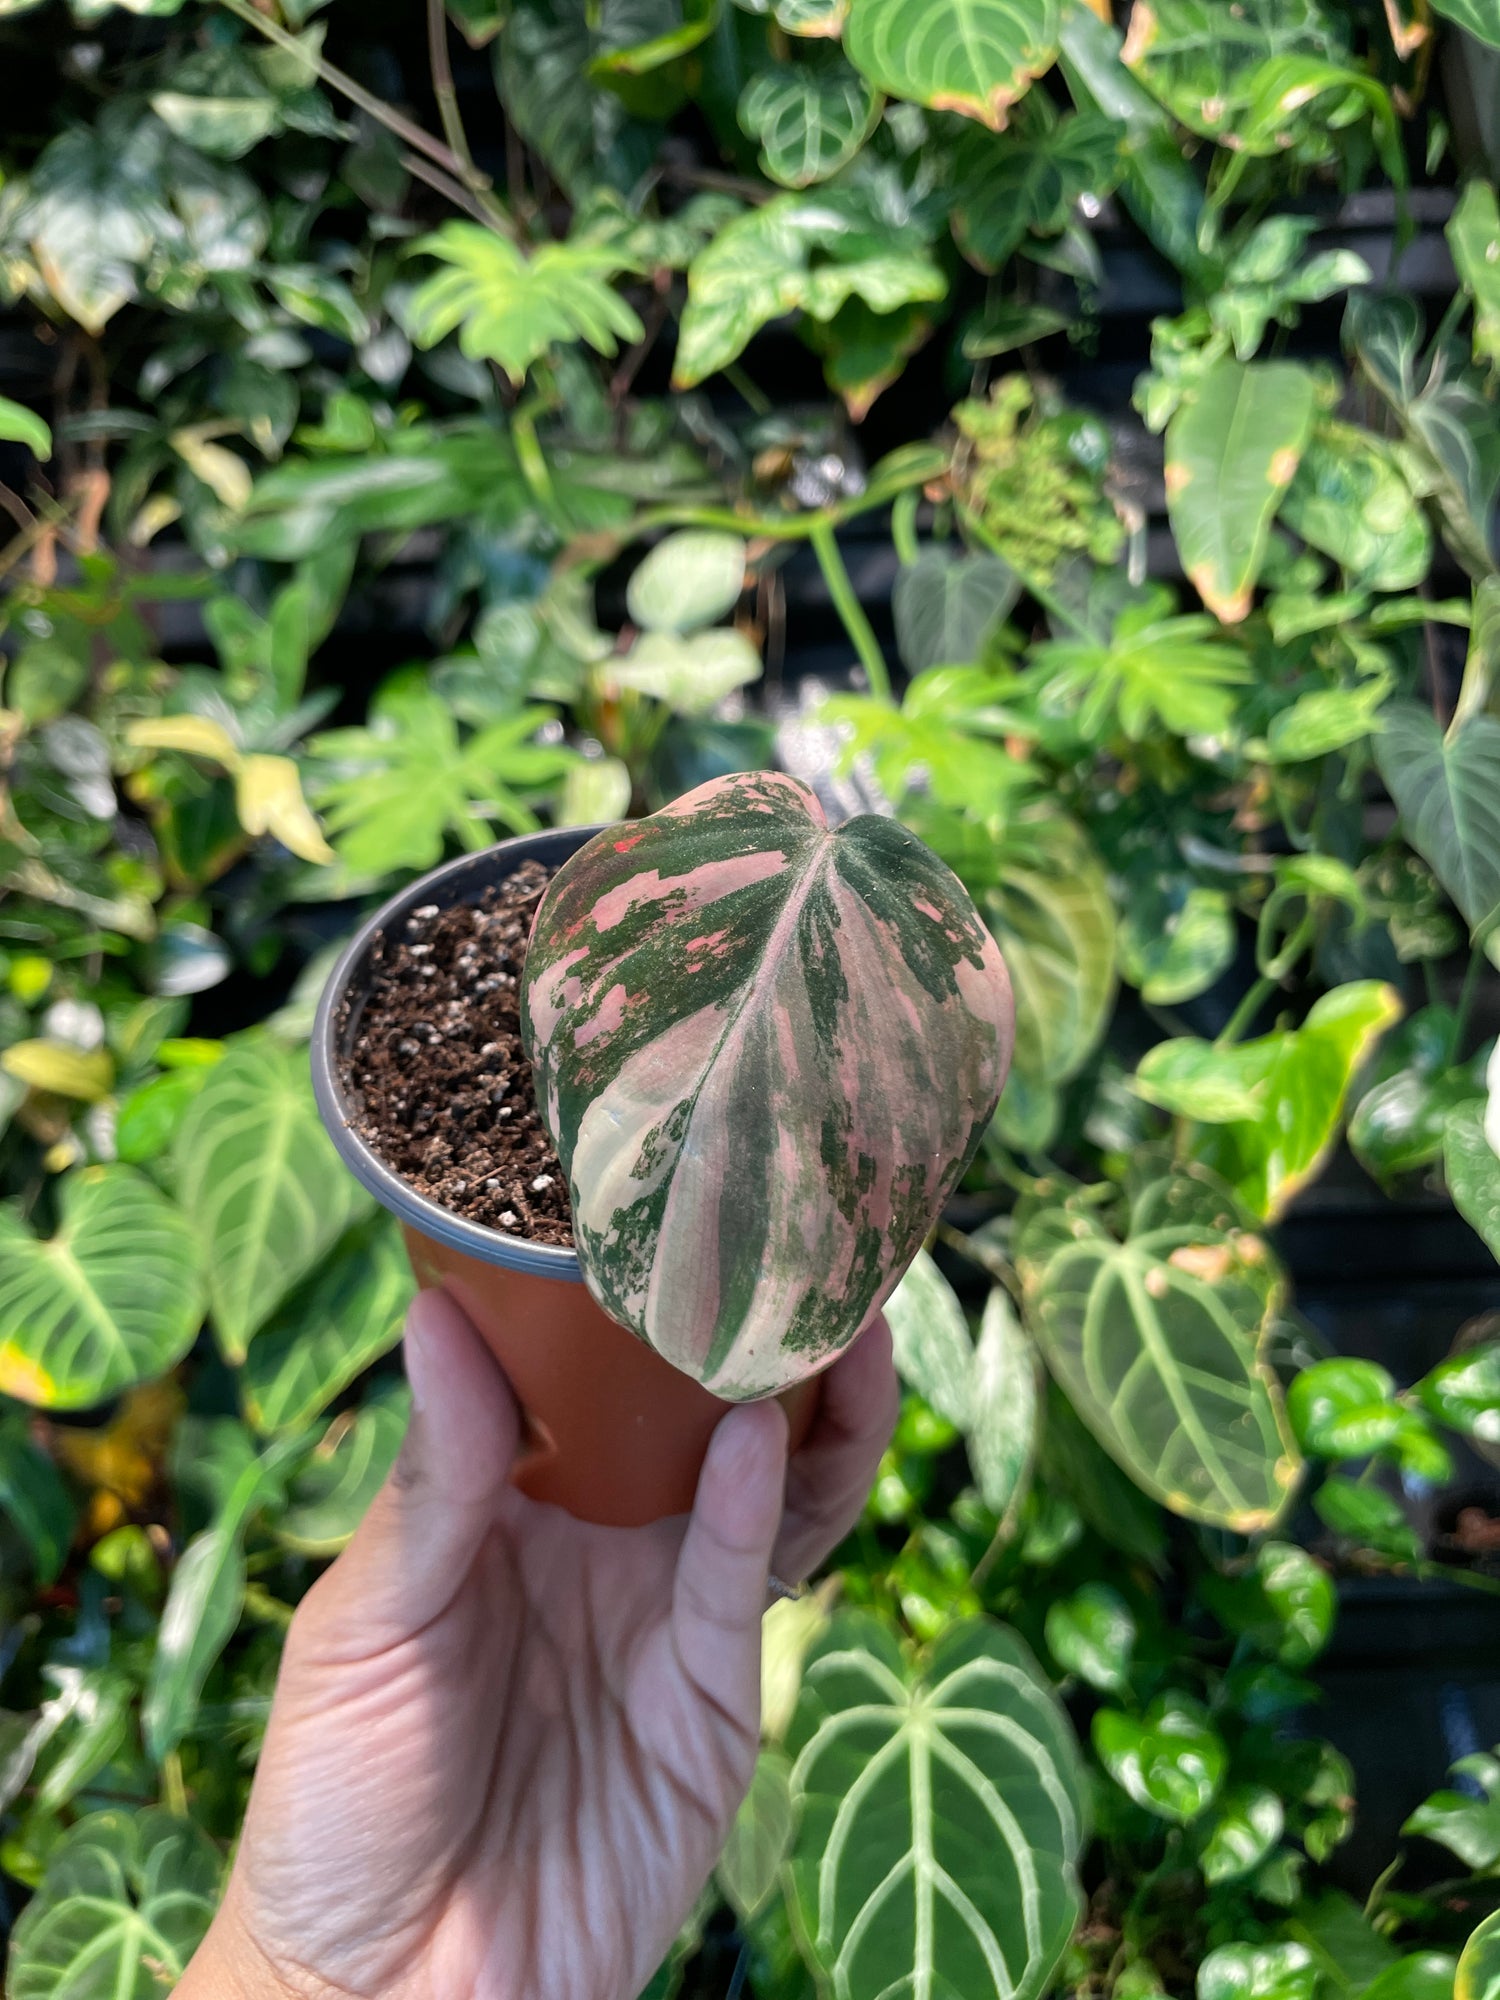 Philodendron Micans Var. Single leaf Cutting